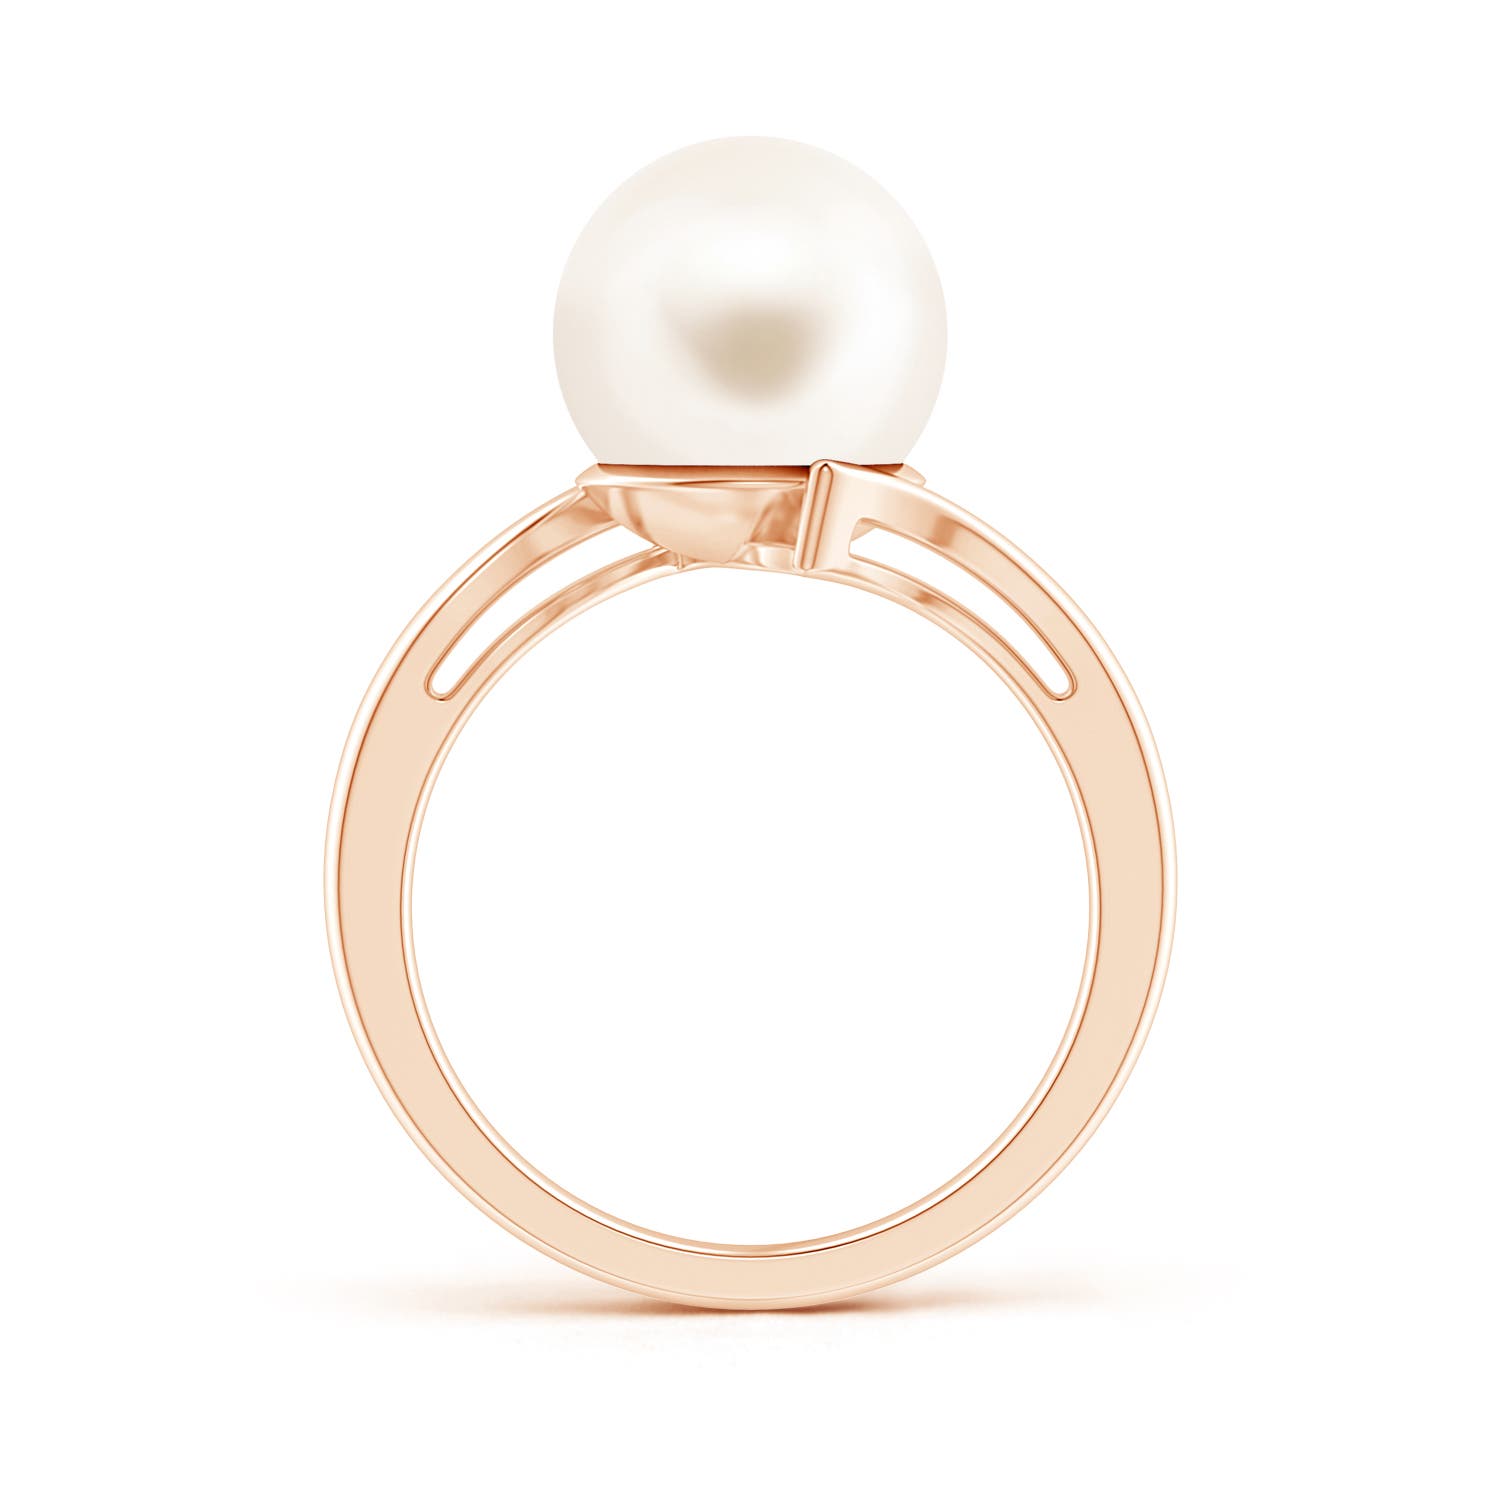 AAA / 7.2 CT / 14 KT Rose Gold